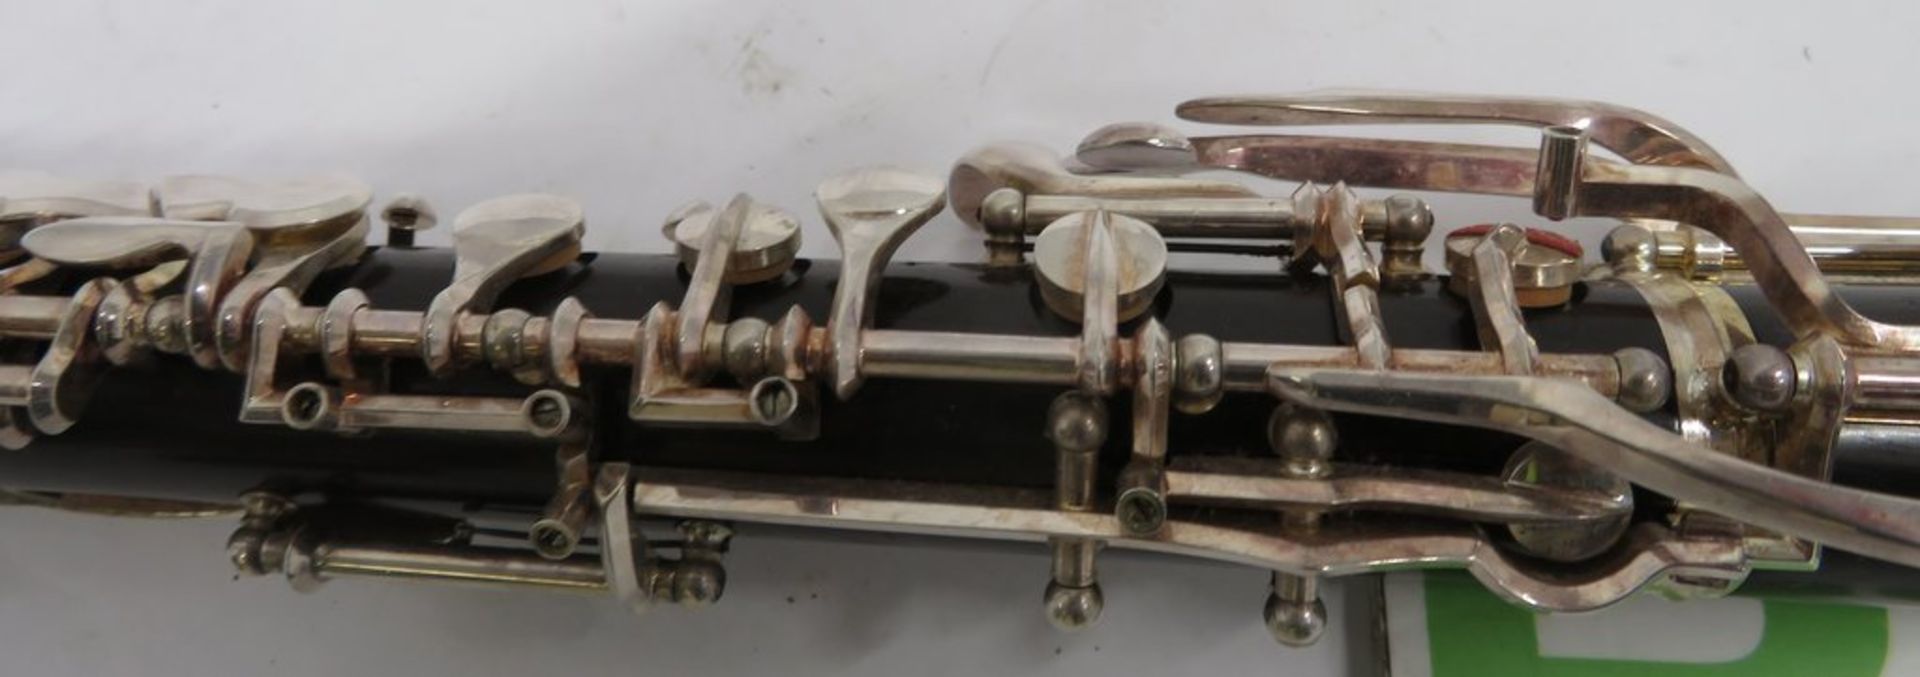 Howarth Cor Anglais S20C With Case. Serial Number: D0400. Please Note That This Item Has - Image 20 of 20